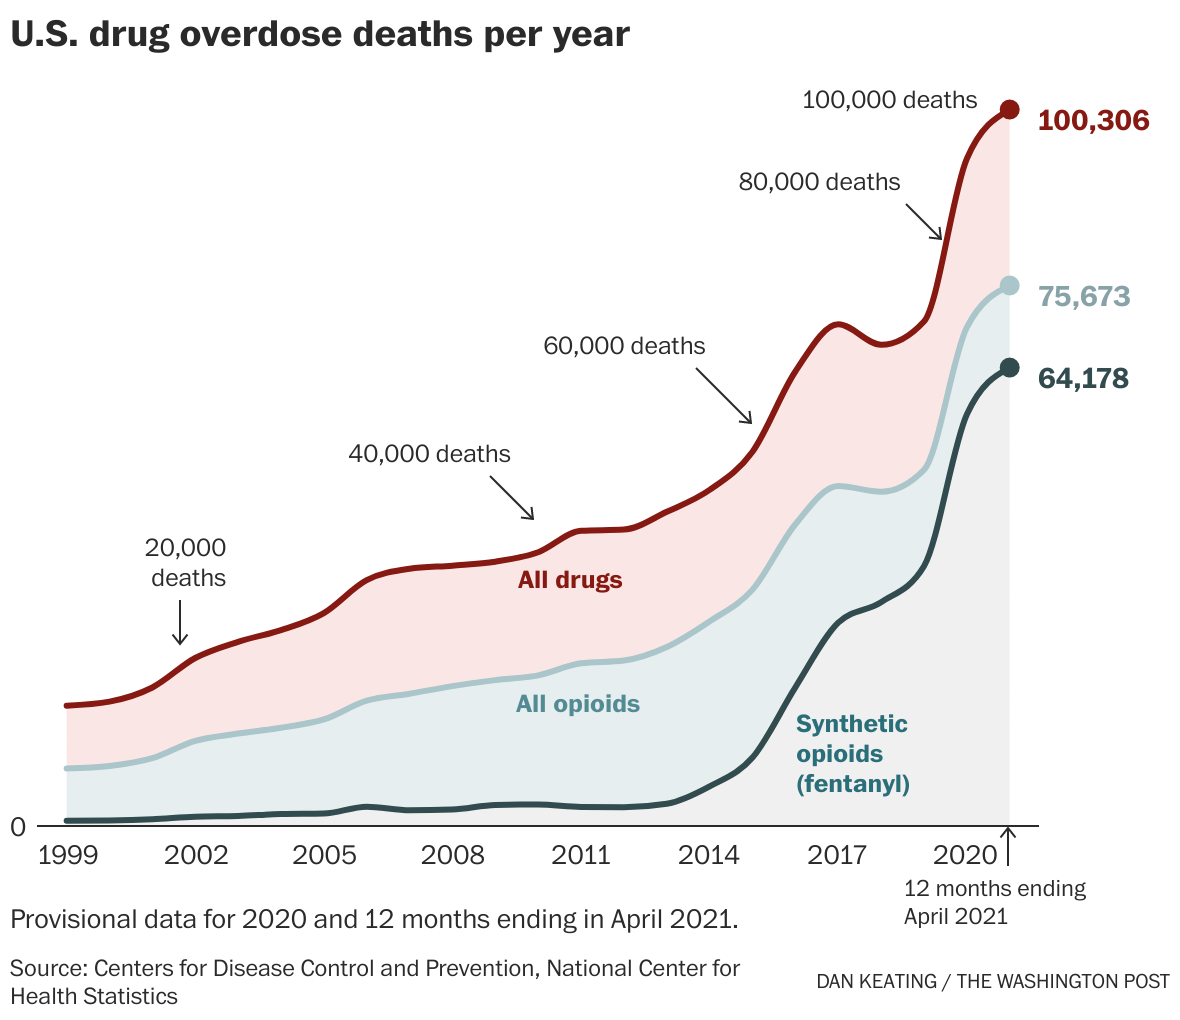 A record 100,000 overdose deaths in 12 months, driven by opioids